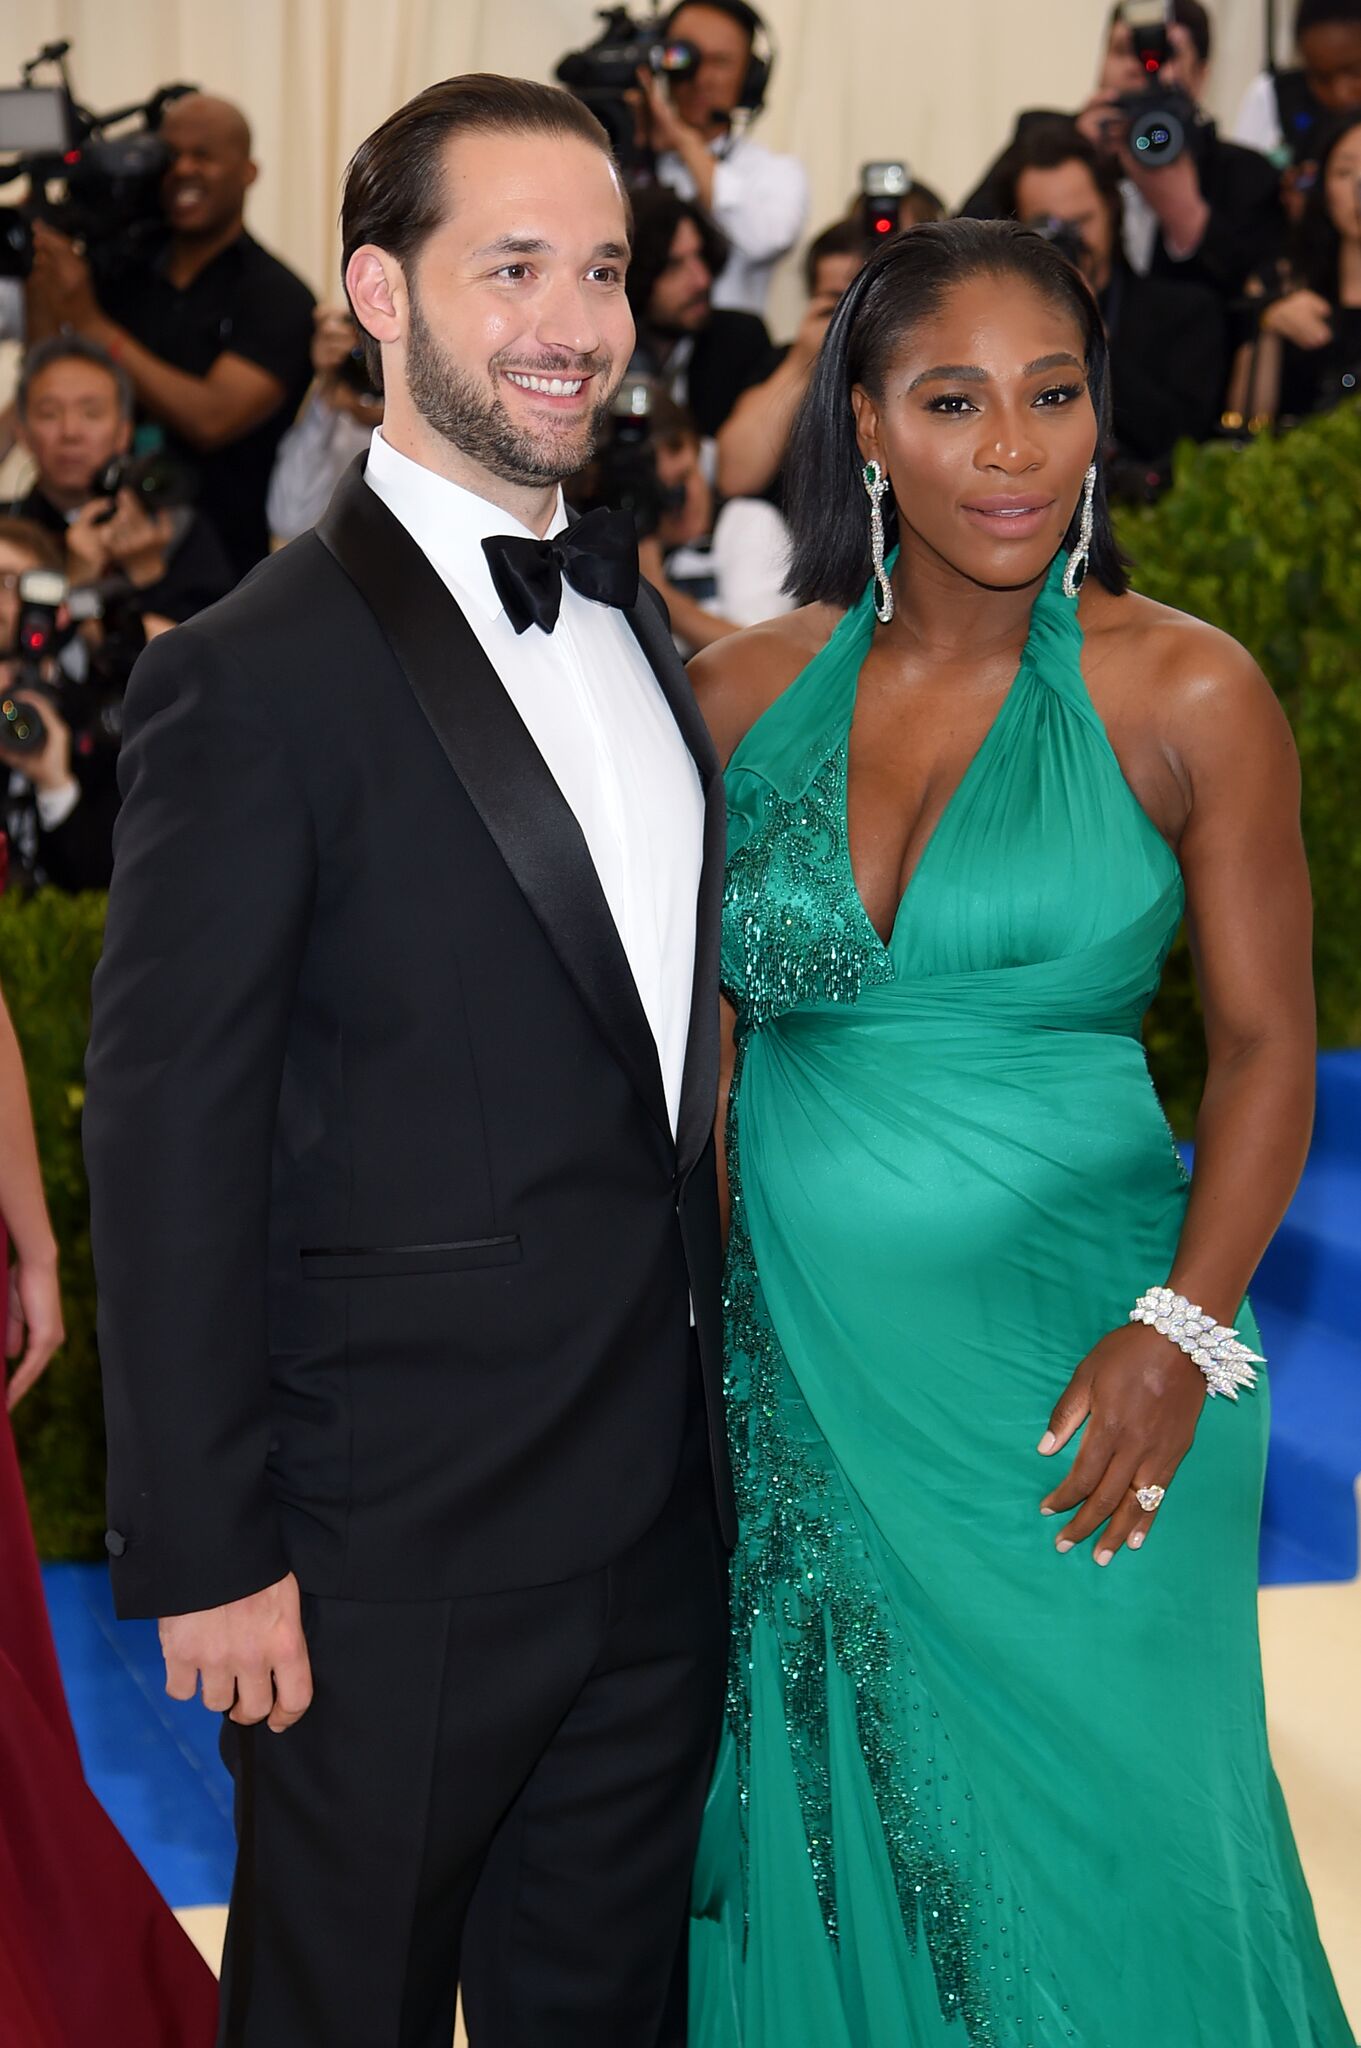 Alexis Ohanian and Serena Williams attend the "Rei Kawakubo/Comme des Garcons: Art Of The In-Between" Costume Institute Gala at Metropolitan Museum of Art on May 1, 2017 | Photo: Getty Images